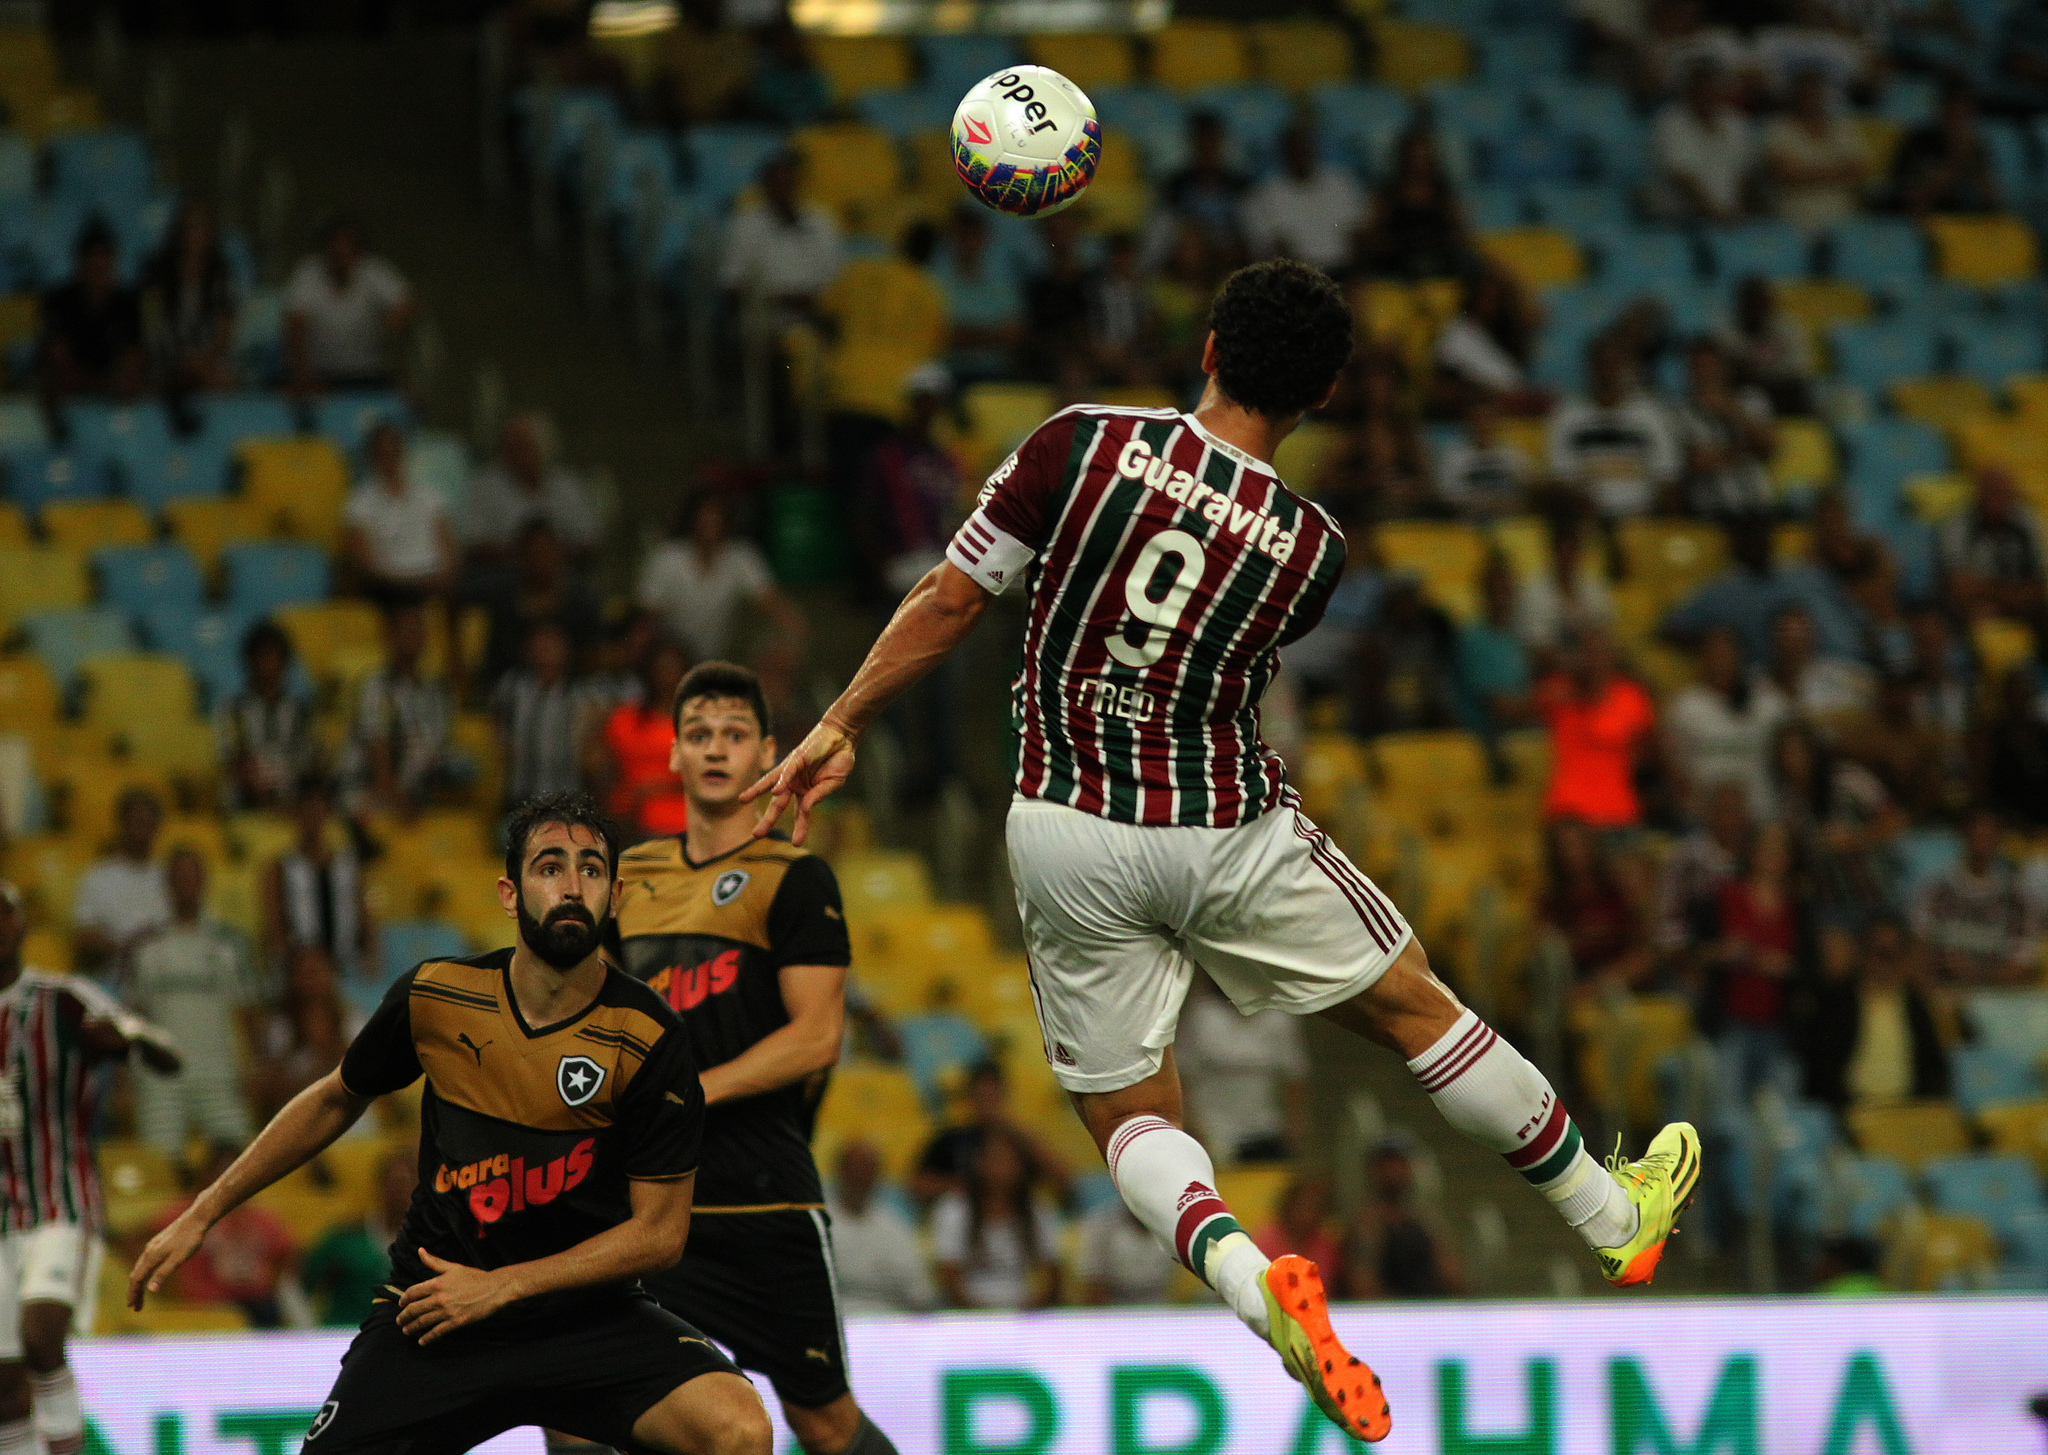 Flu Wins, While Fla and Vasco Draw in 1st Carioca Semifinals